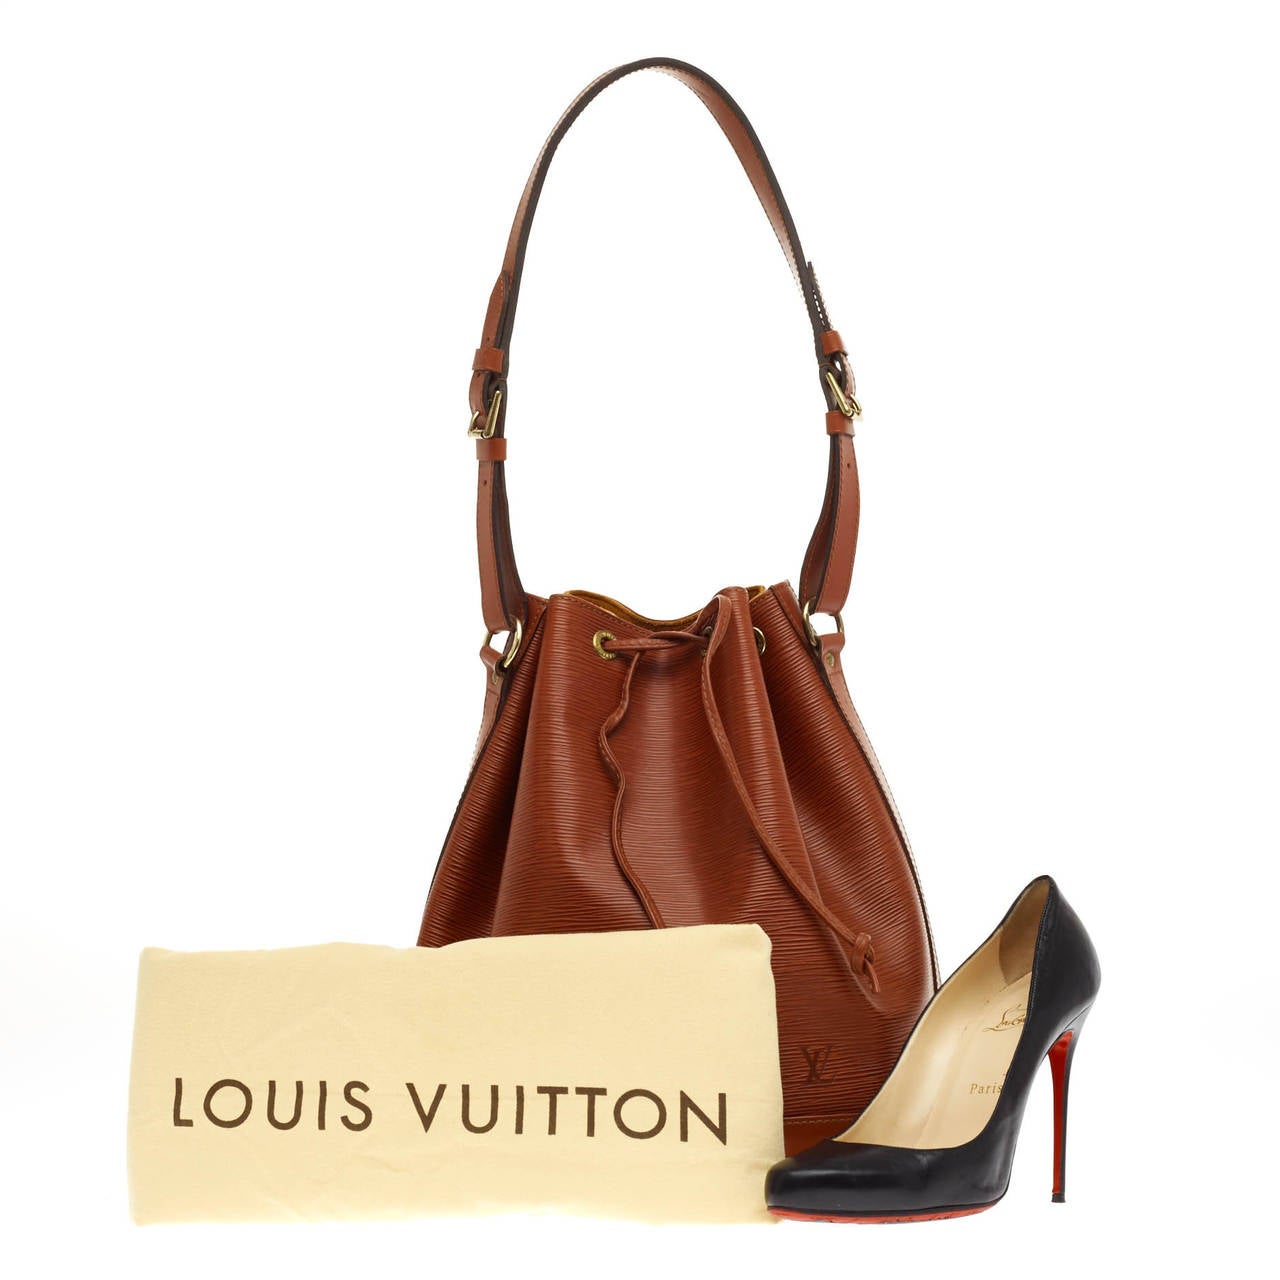 This authentic Louis Vuitton Noe in Large is crafted in tan Epi leather. This classic bucket bag transcends seasons and style with its earthy hues accented with gold hardware. The adjustable strap and leather drawstring closure allow the bag to be